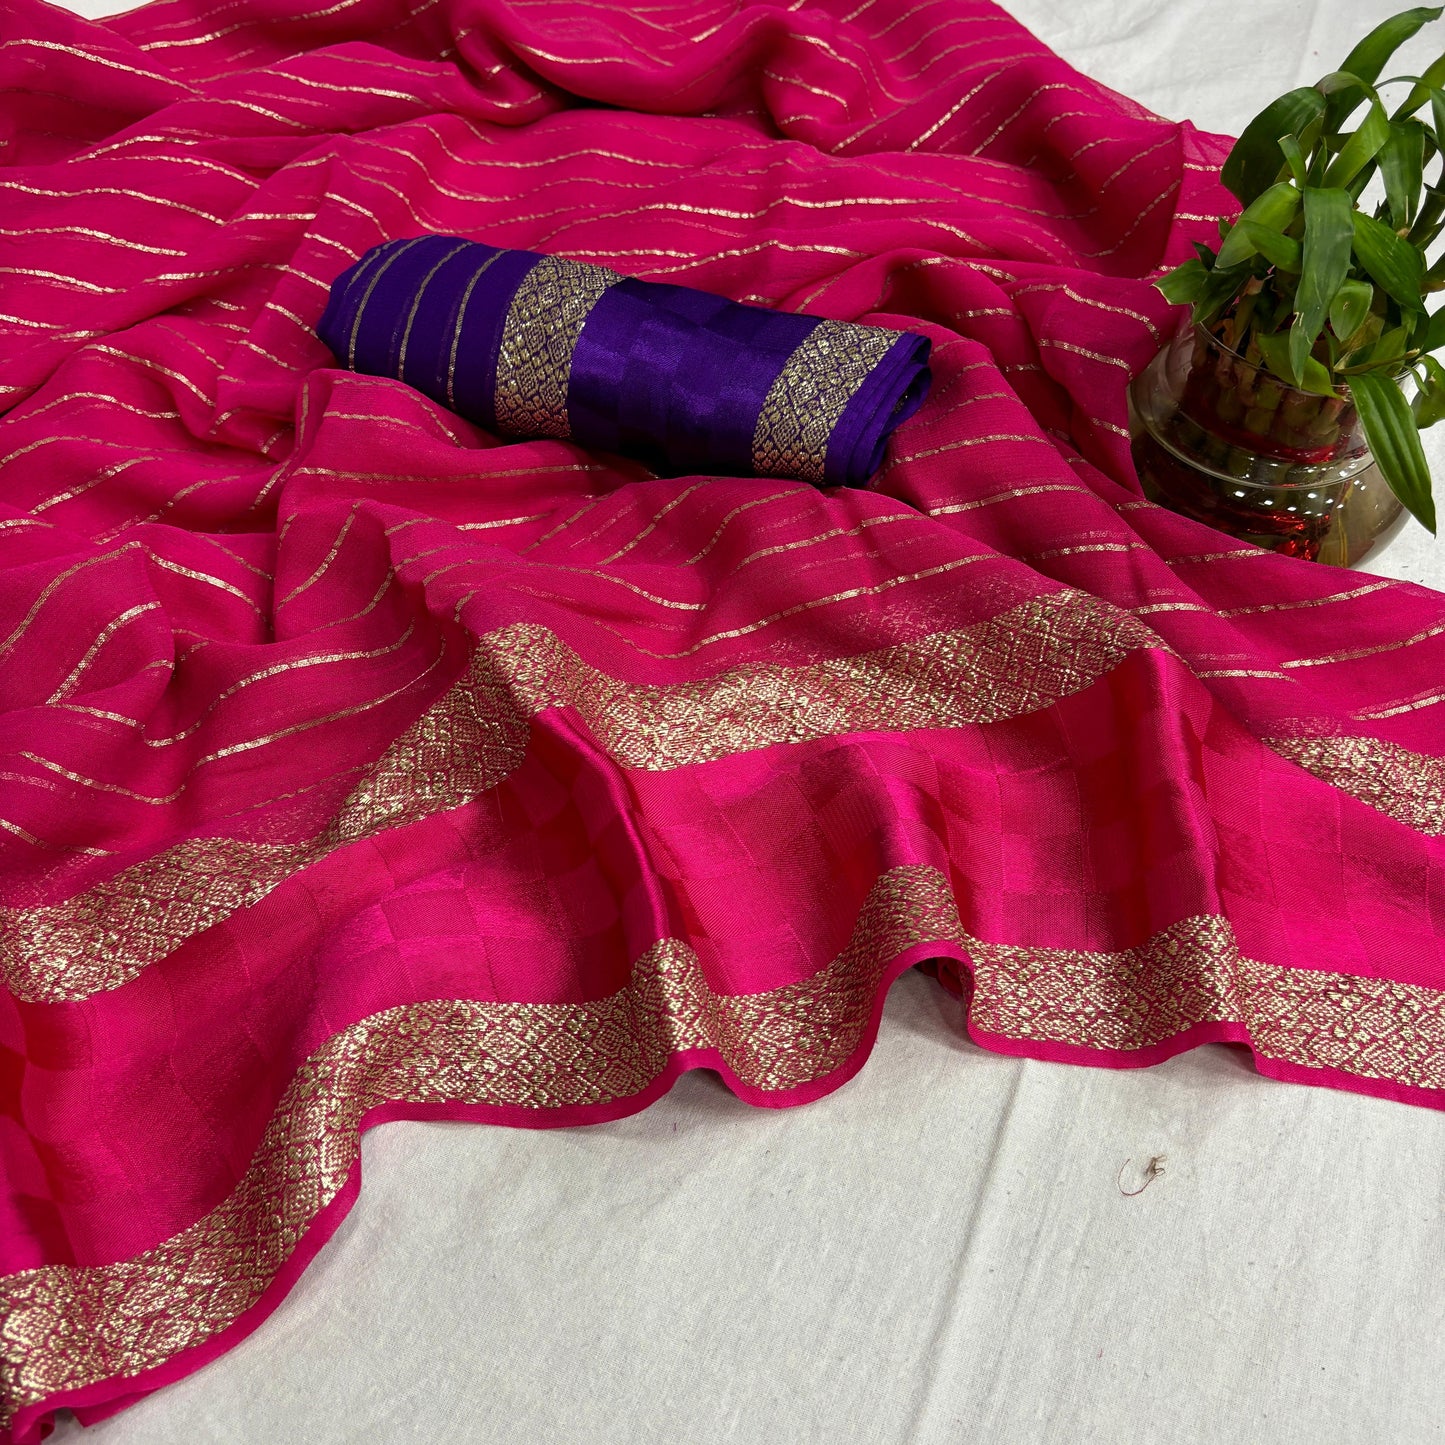 Pink Color Pure Viscose Georgette With Self Satin Chex Jacquard Border With Stripes Linning All Over In Body